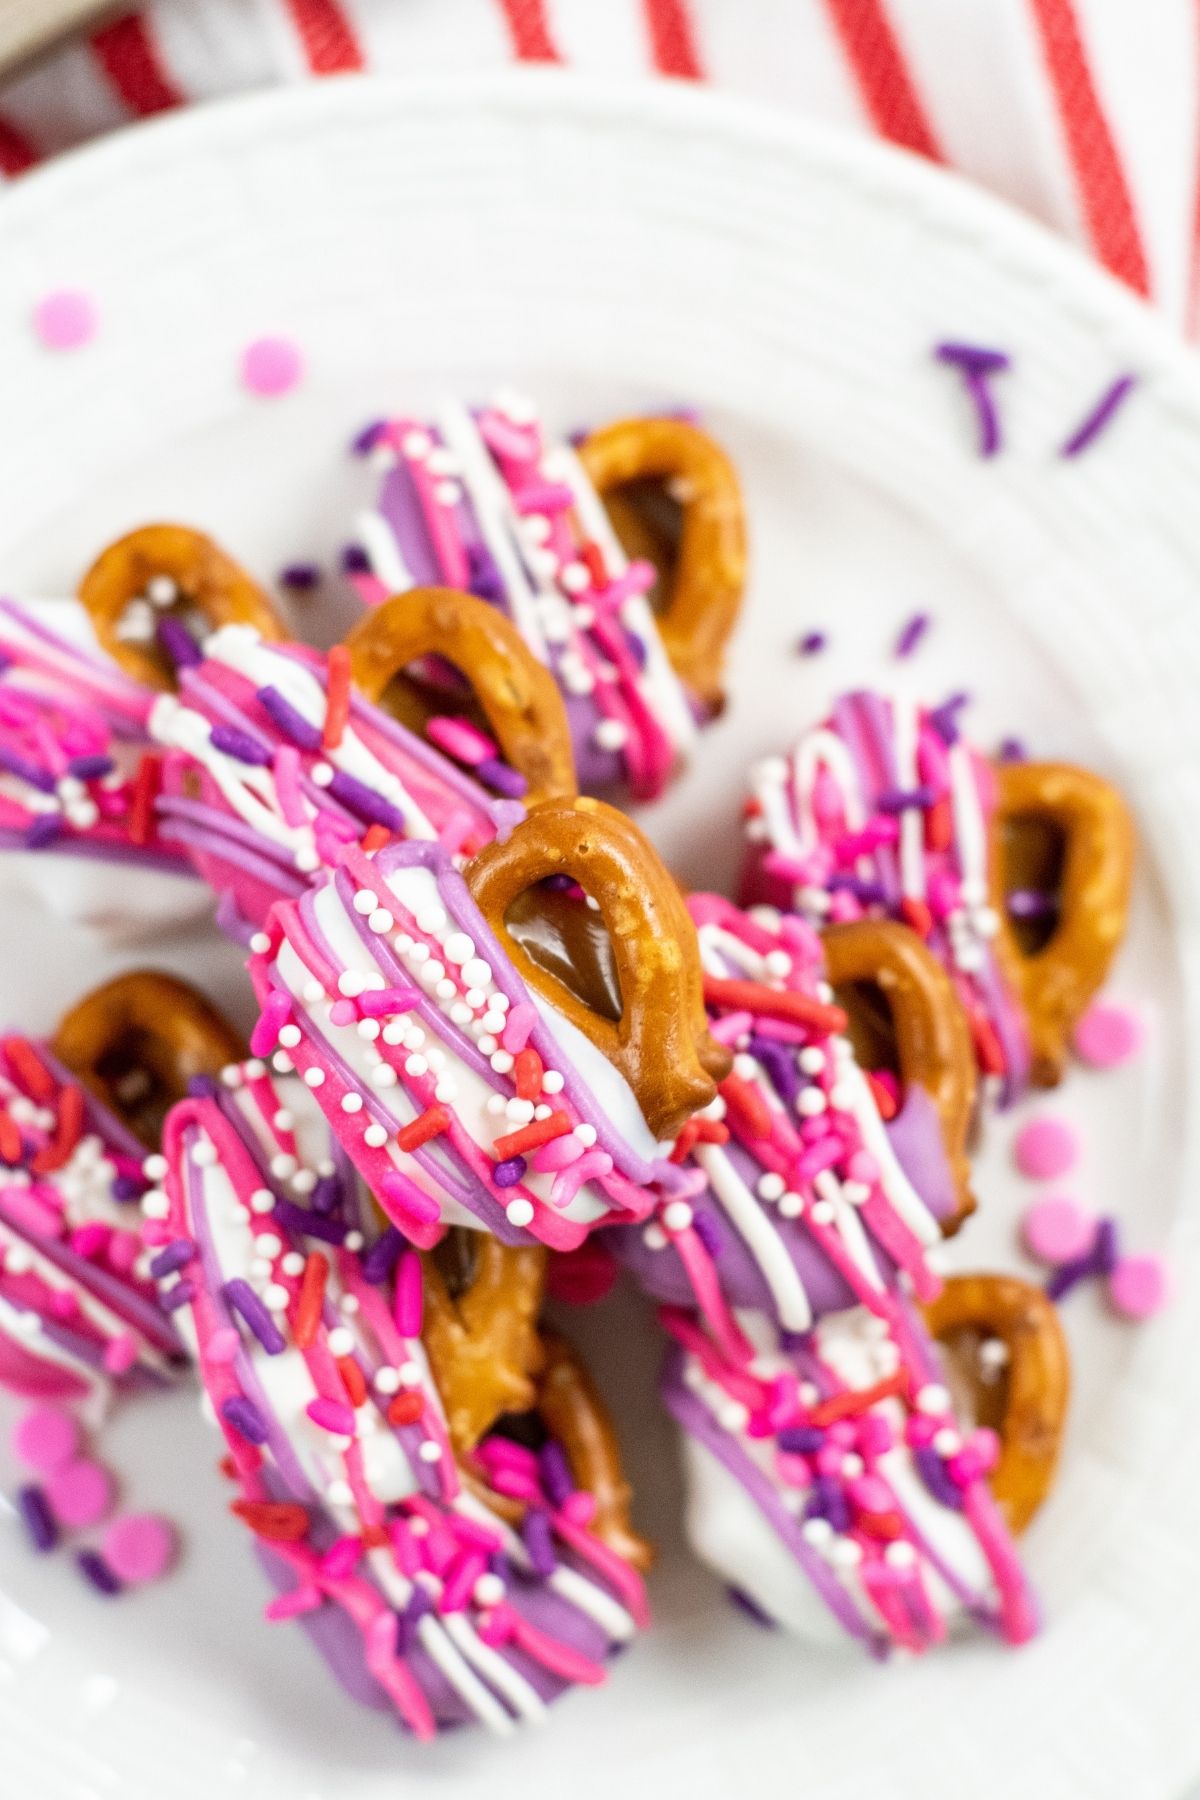 small pretzels with caramel and white chocolate with purple and pink drizzled chocolate and sprinkles